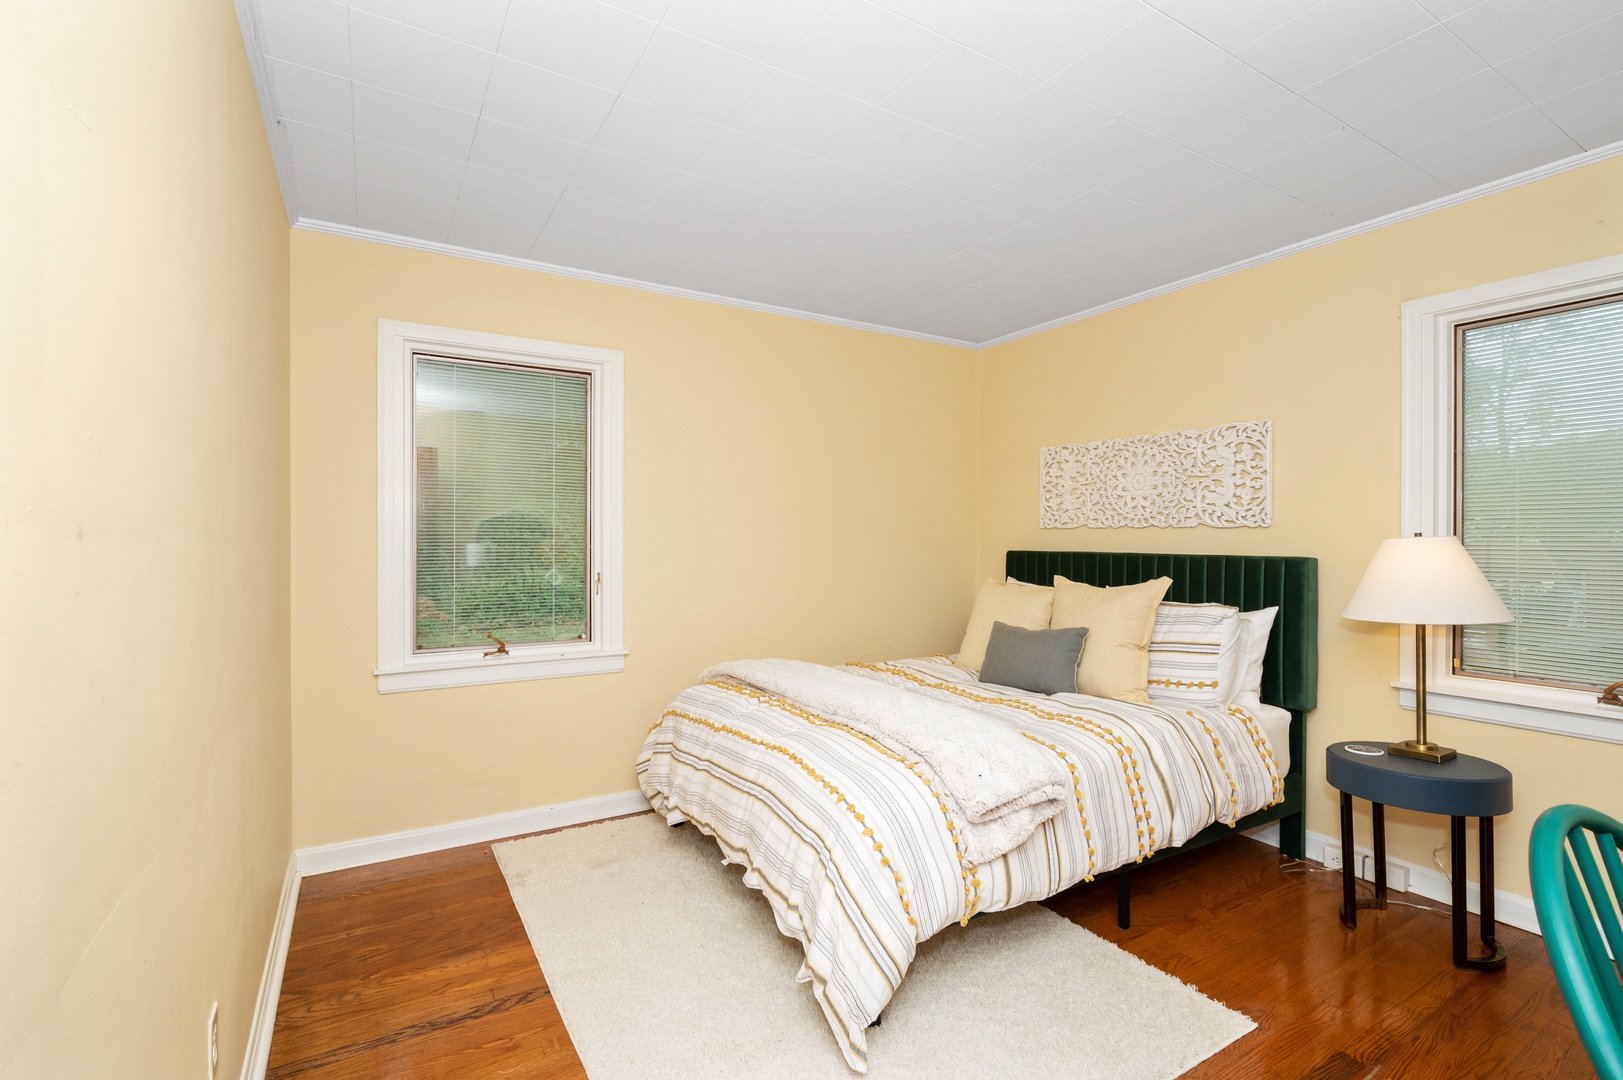 The spacious first-floor bedroom offers a queen bed & desk workspace